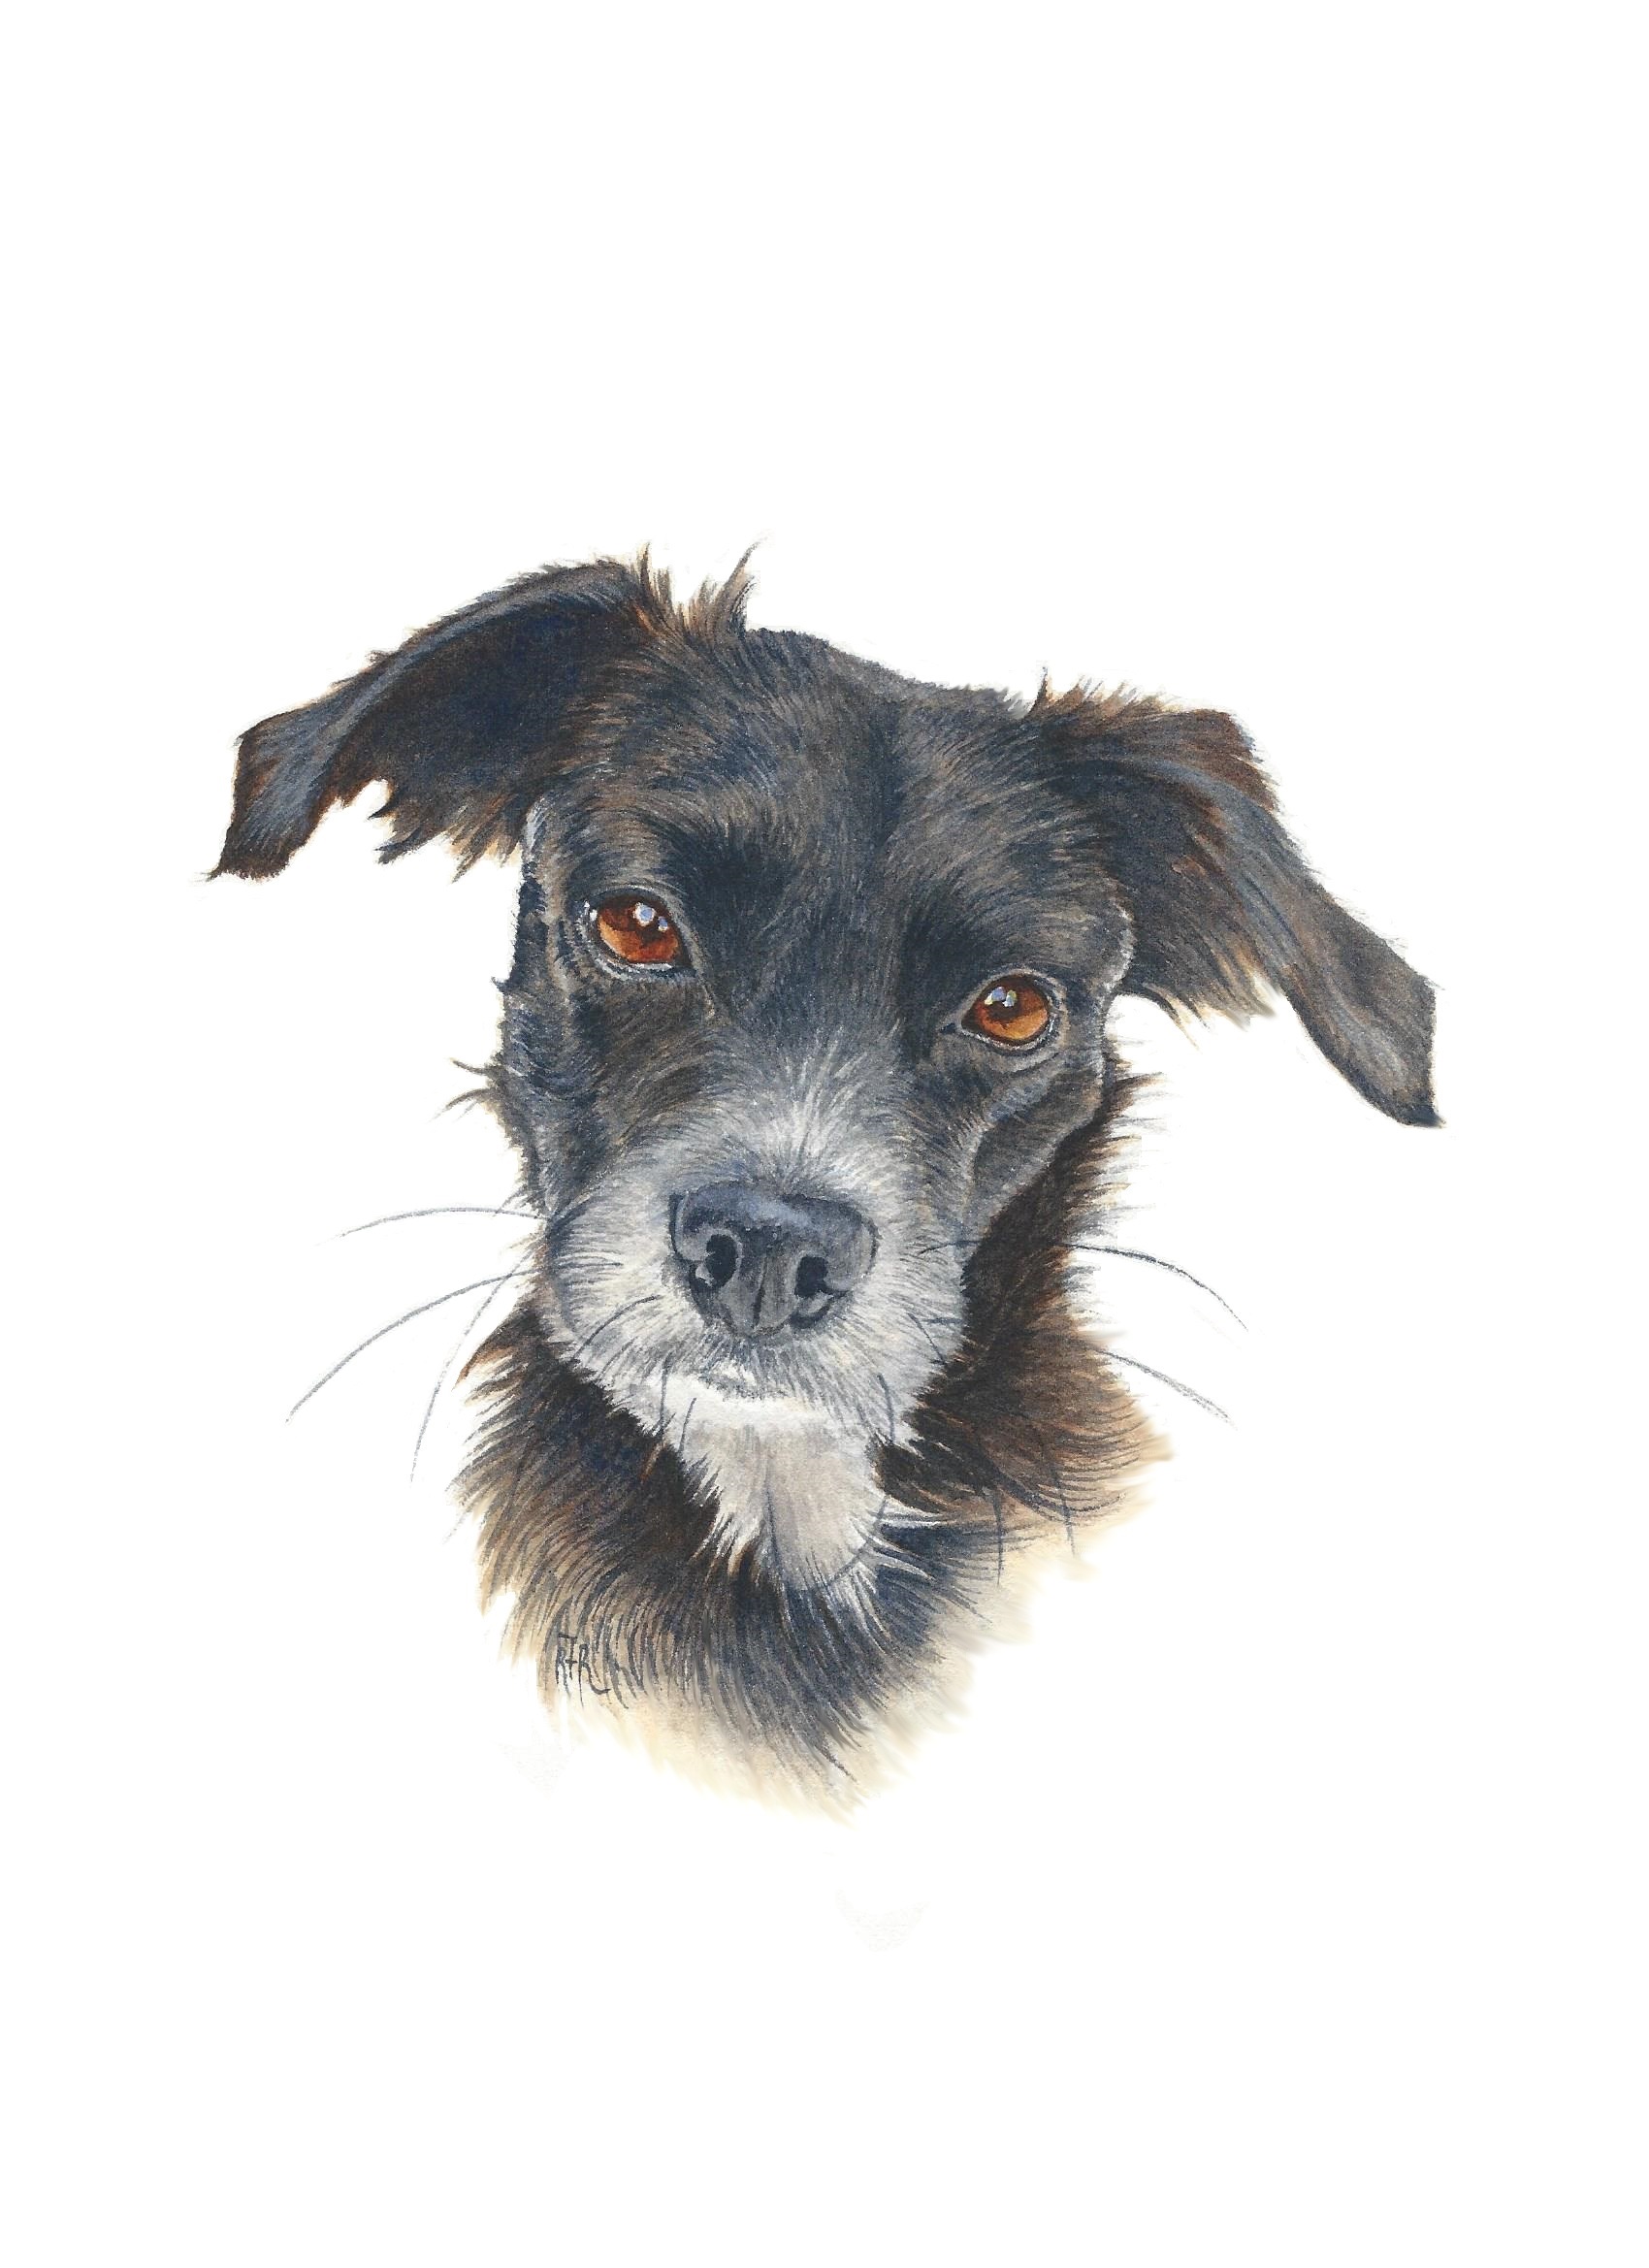 How To Paint A Realistic Black Dog In Watercolor